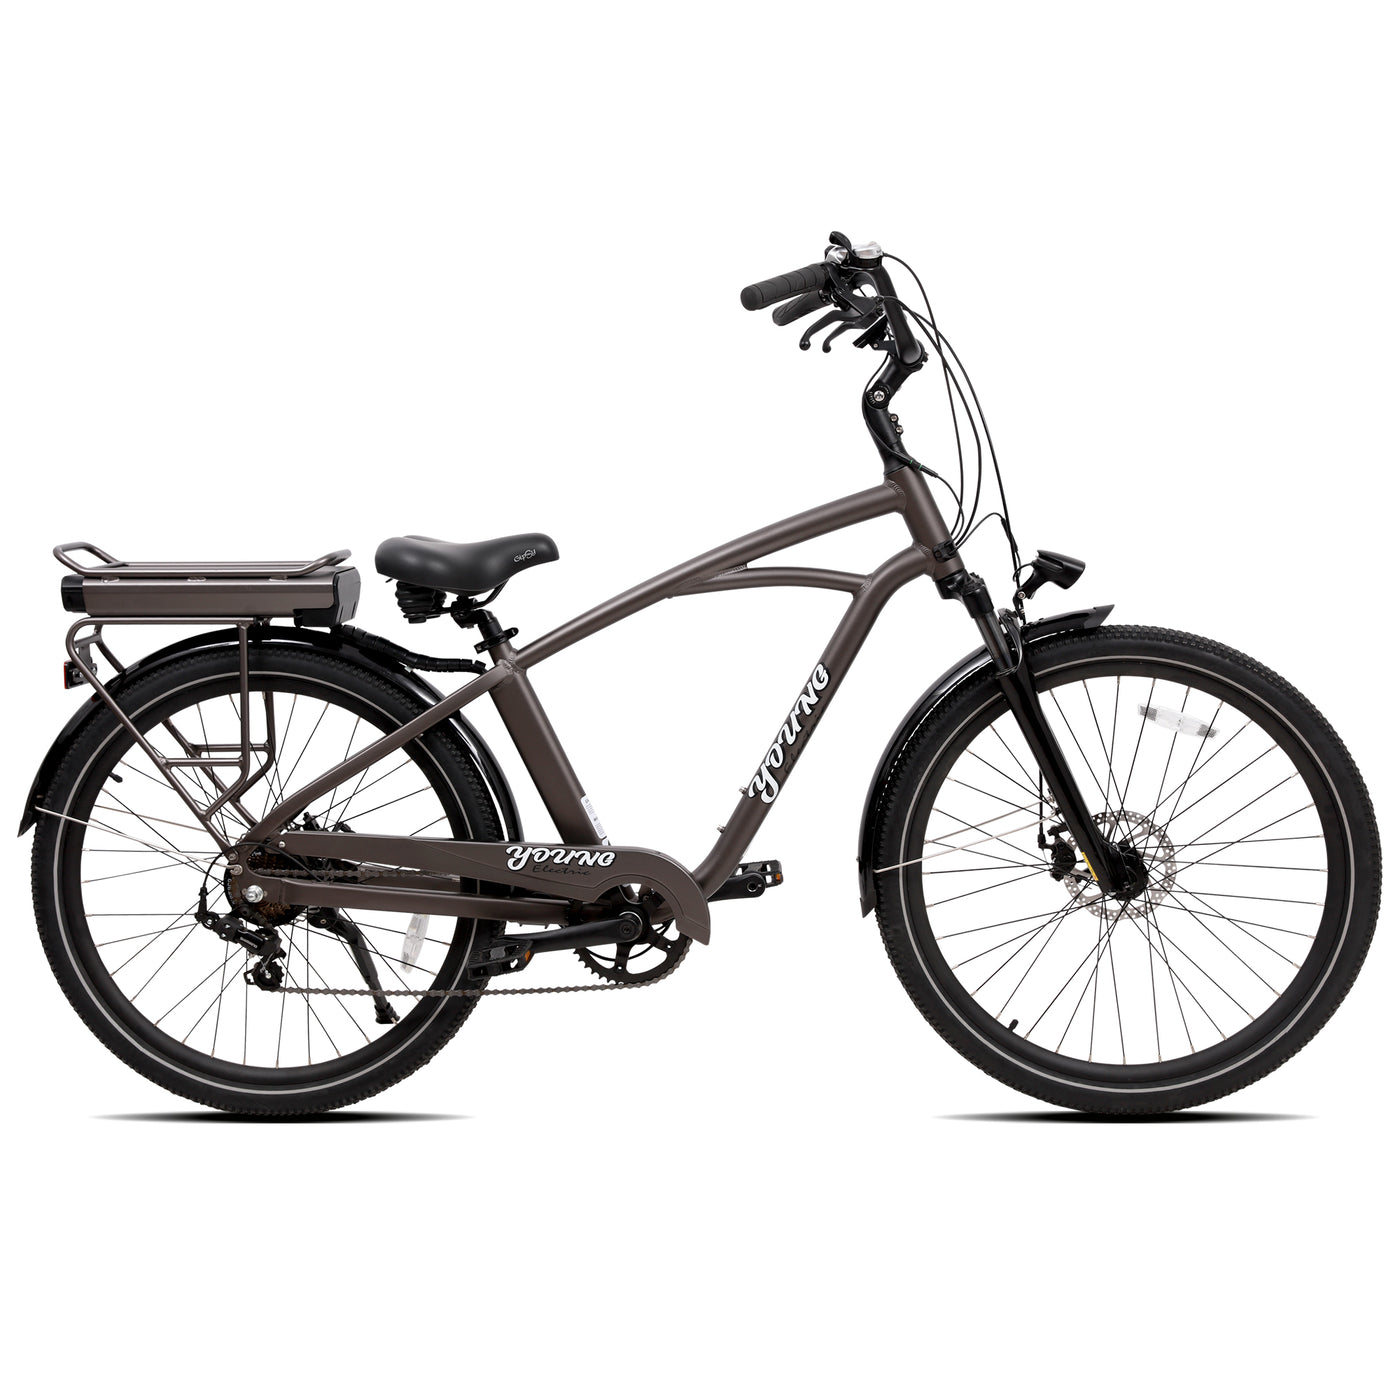 Young Electric Vie 27.5’’ Cruiser | 350W Ultra-Comfy Ebike, Up to 90 Miles Riding Range, Shimano 7-Speed,  Torque Sensor | PRE ORDER